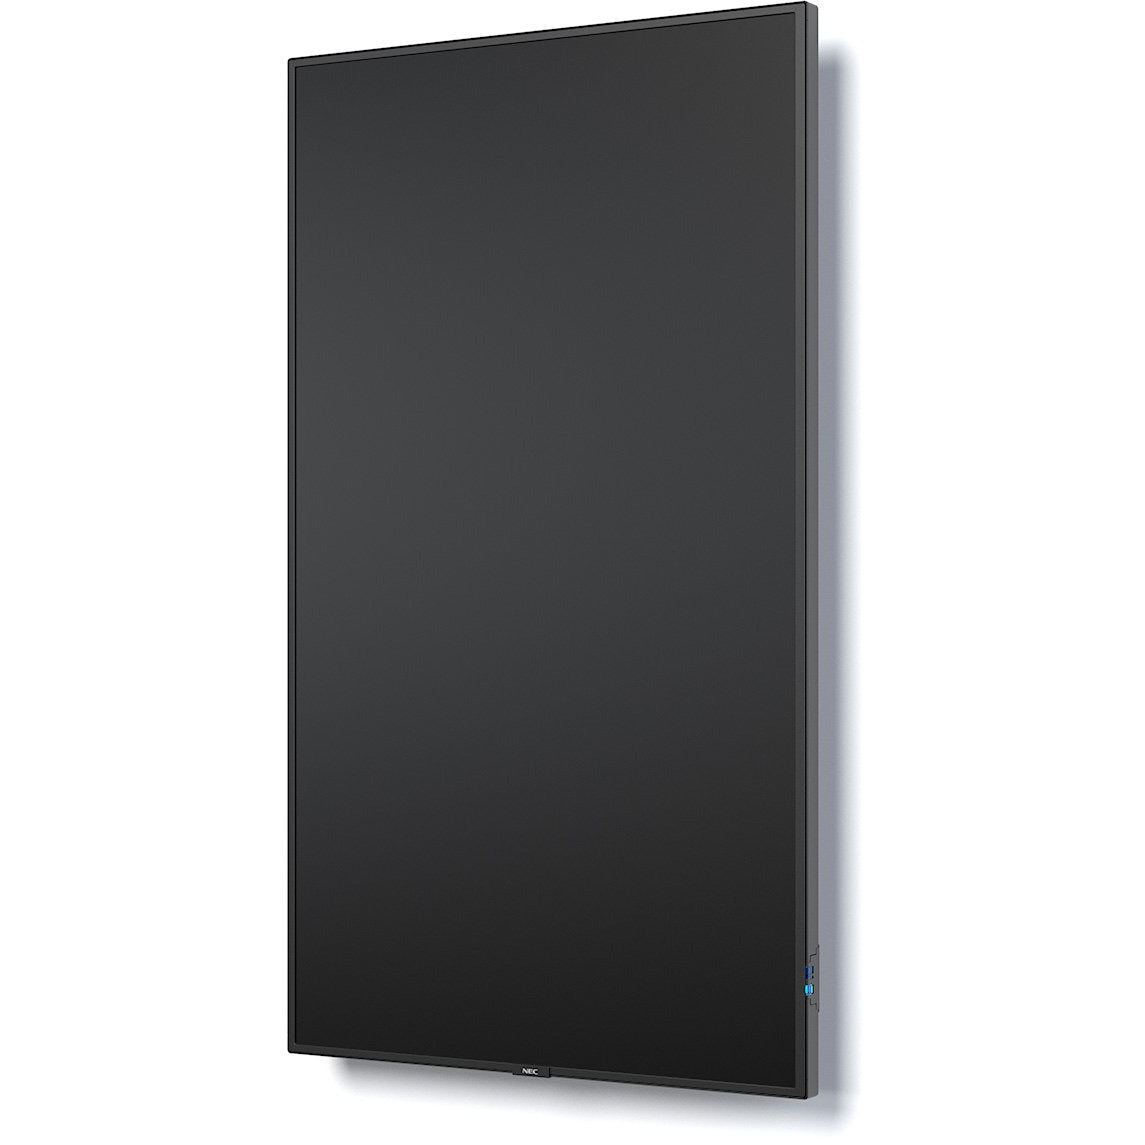 NEC MultiSync® P435-MPi4 LCD 43" Professional Large Format Displays (incl. NEC MediaPlayer)